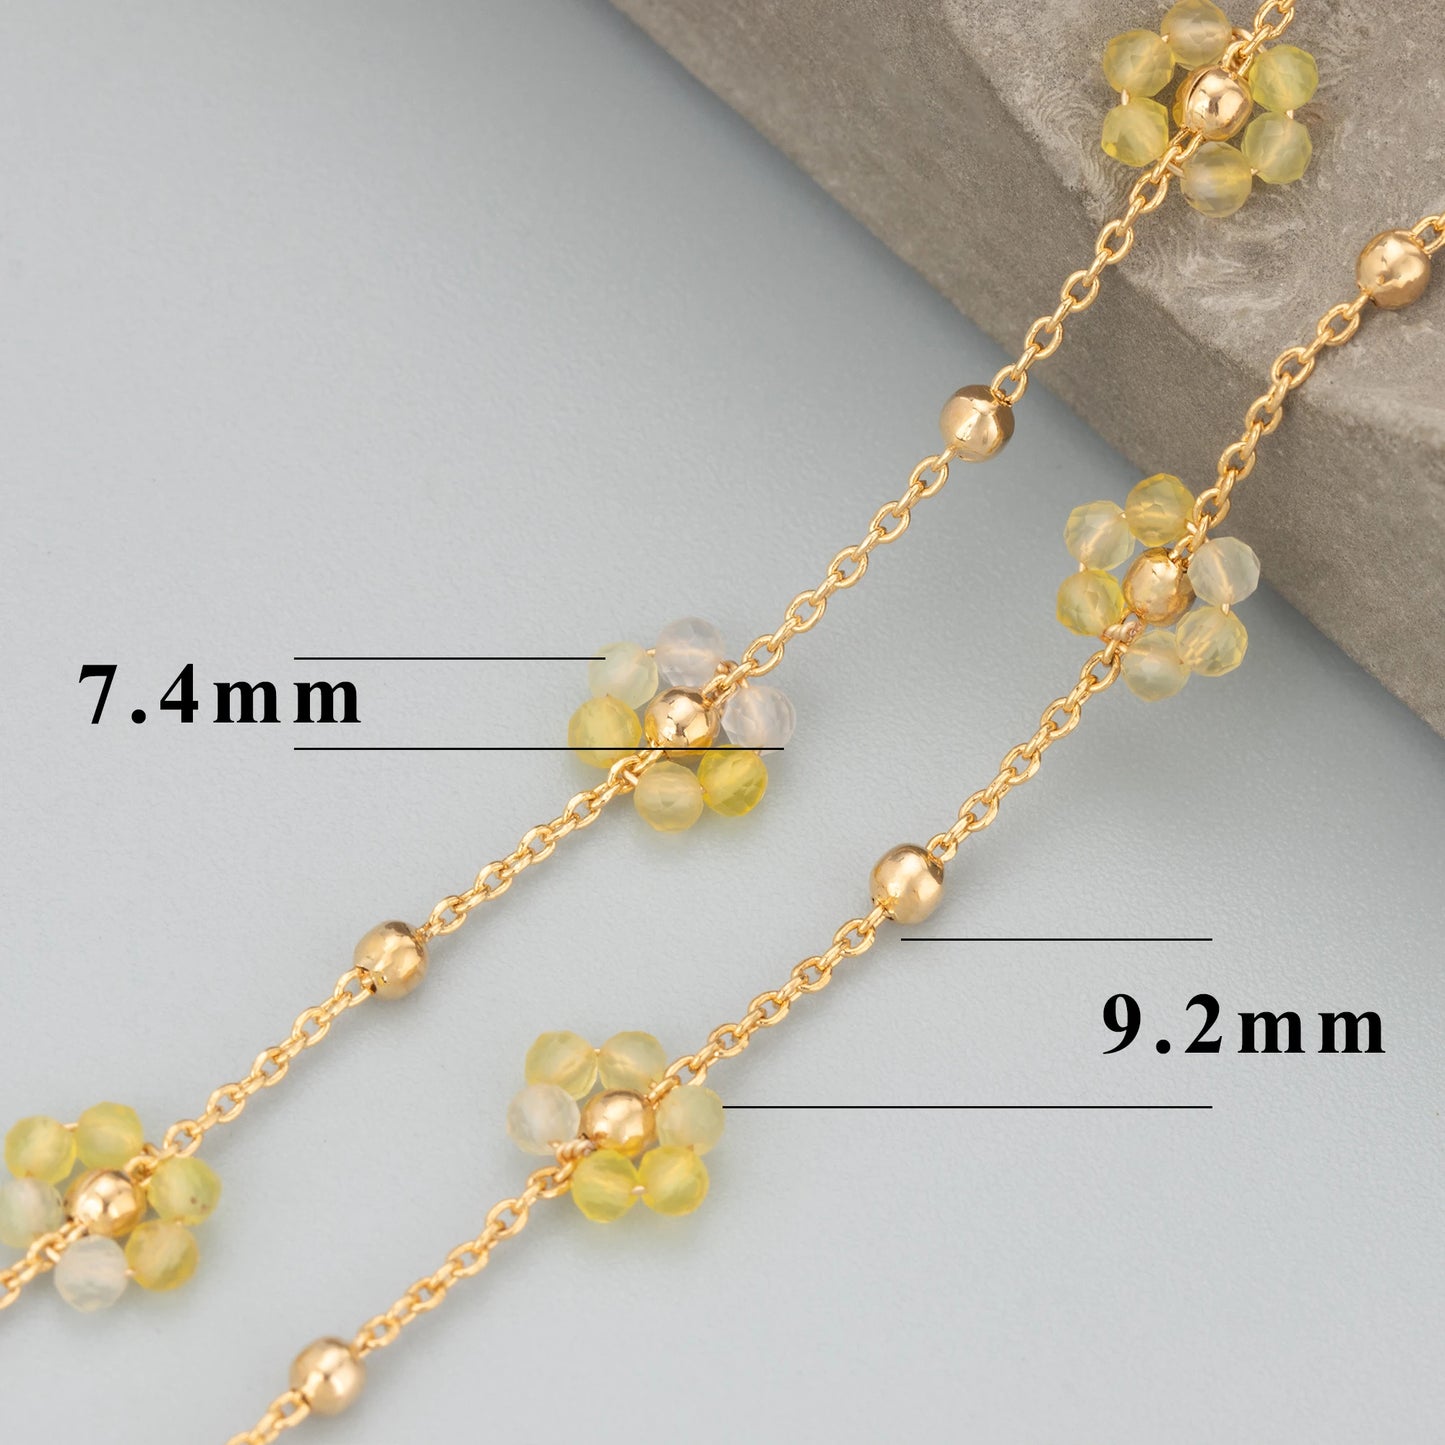 GUFEATHER C293,diy chain,18k gold plated,stainless steel,natural stone,hand made,jewelry making,diy bracelet necklace,1m/lot